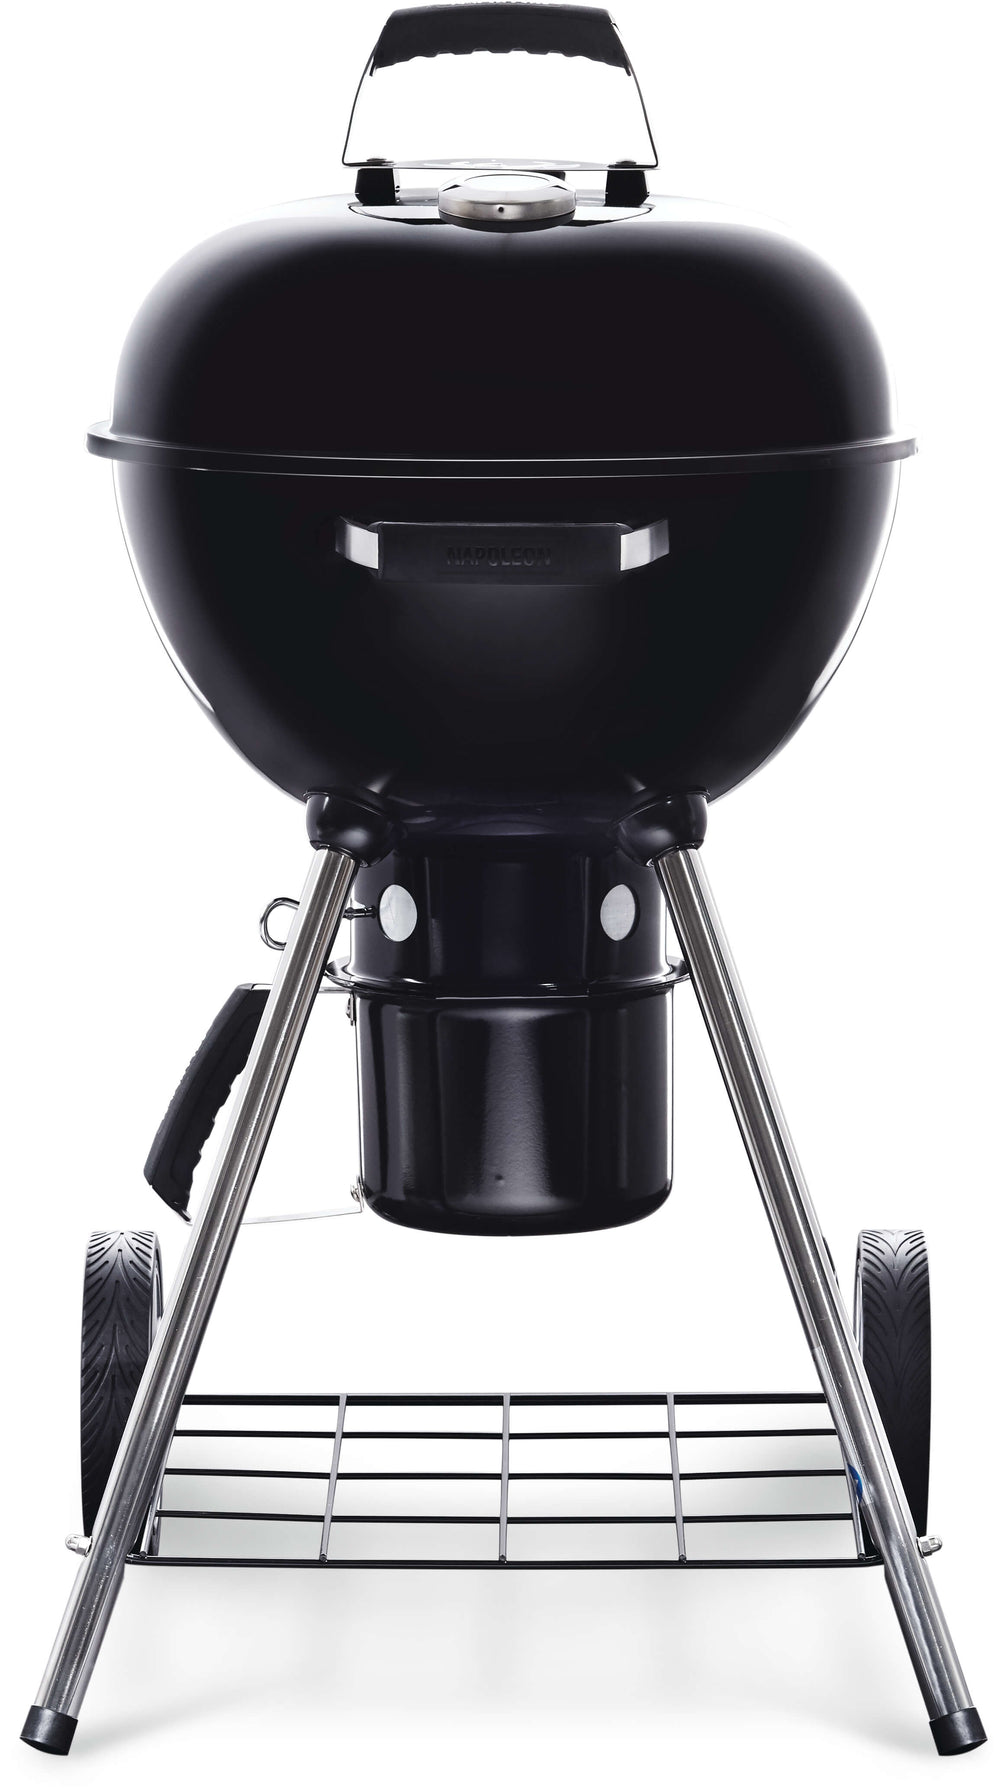 18" Charcoal Kettle Grill